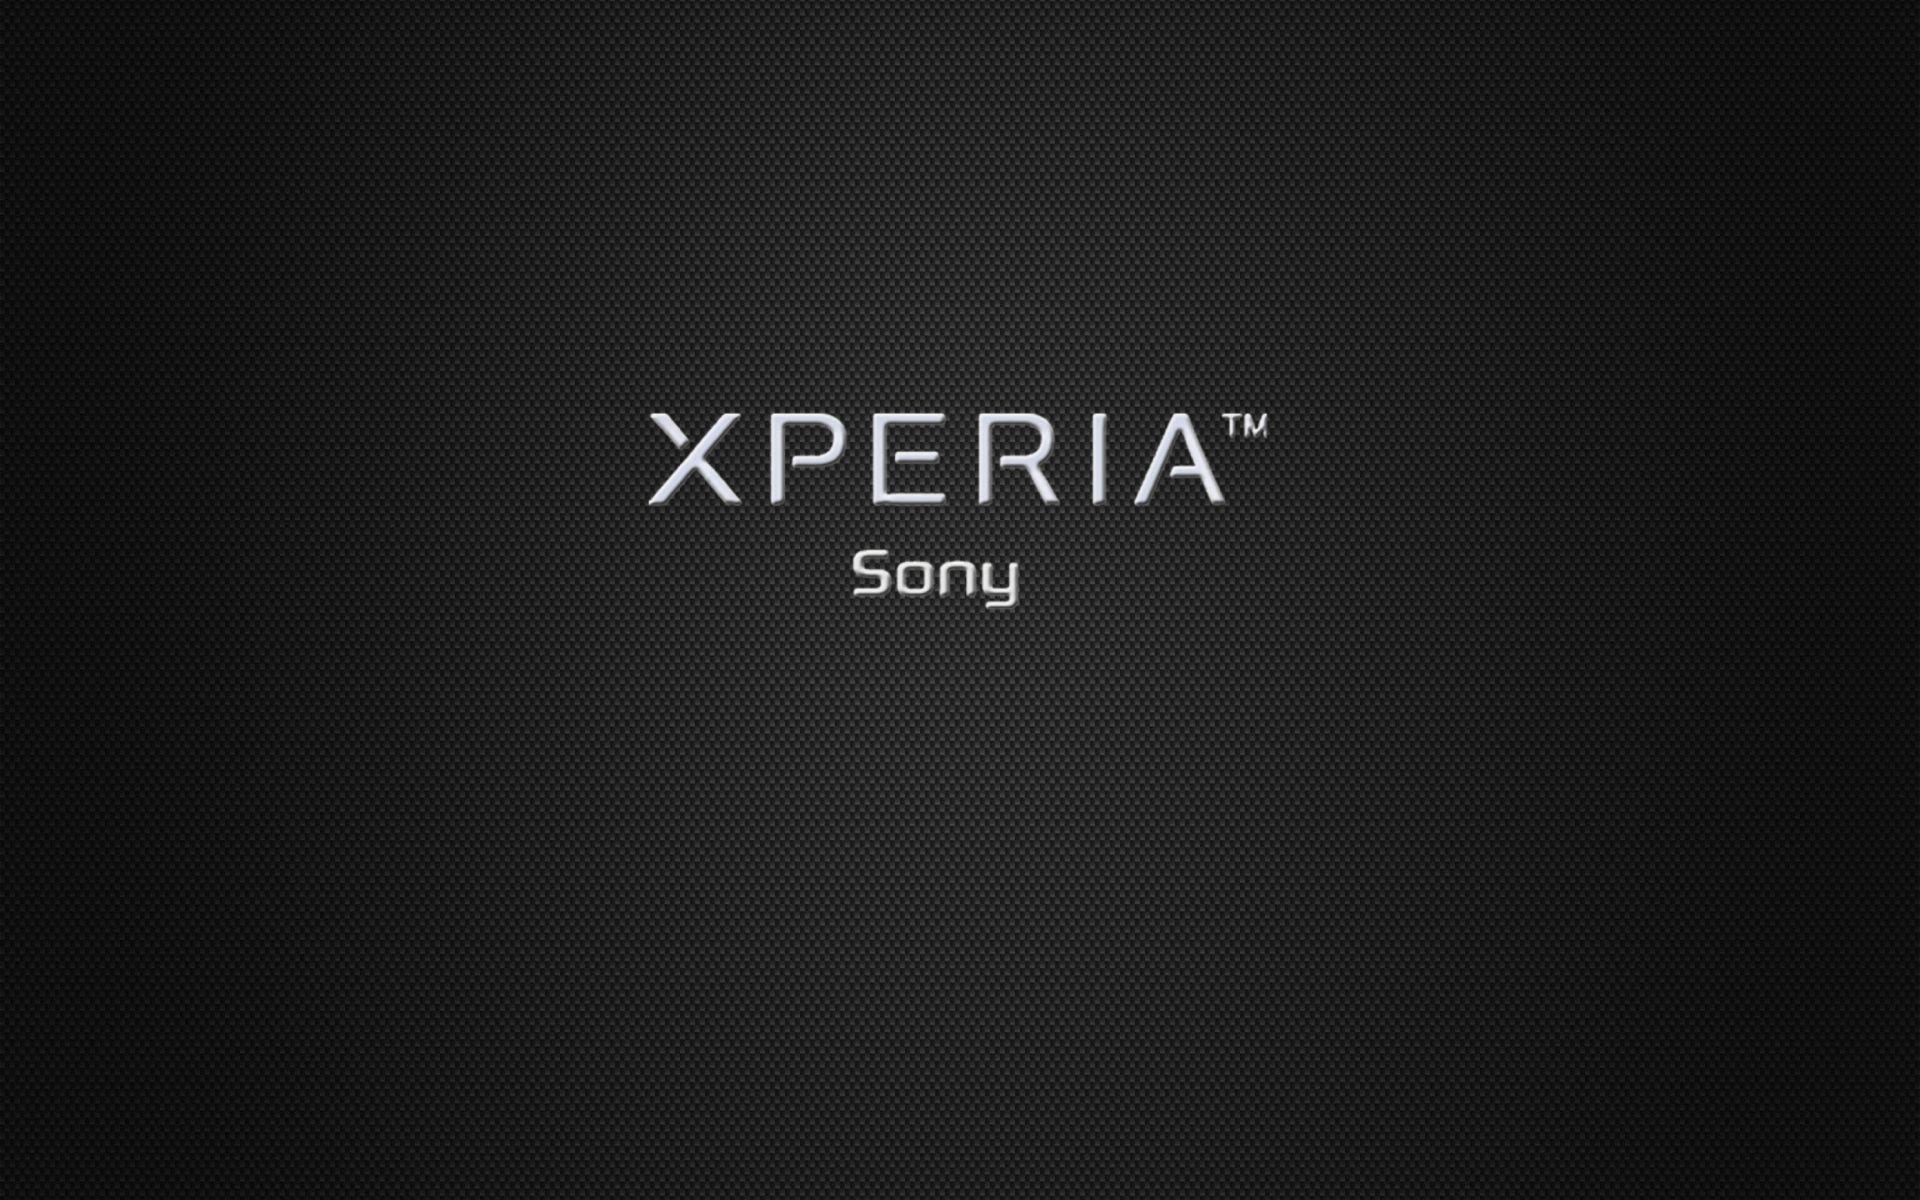 Sony Xperia XZ and Xperia X Compact confirmed. Technology